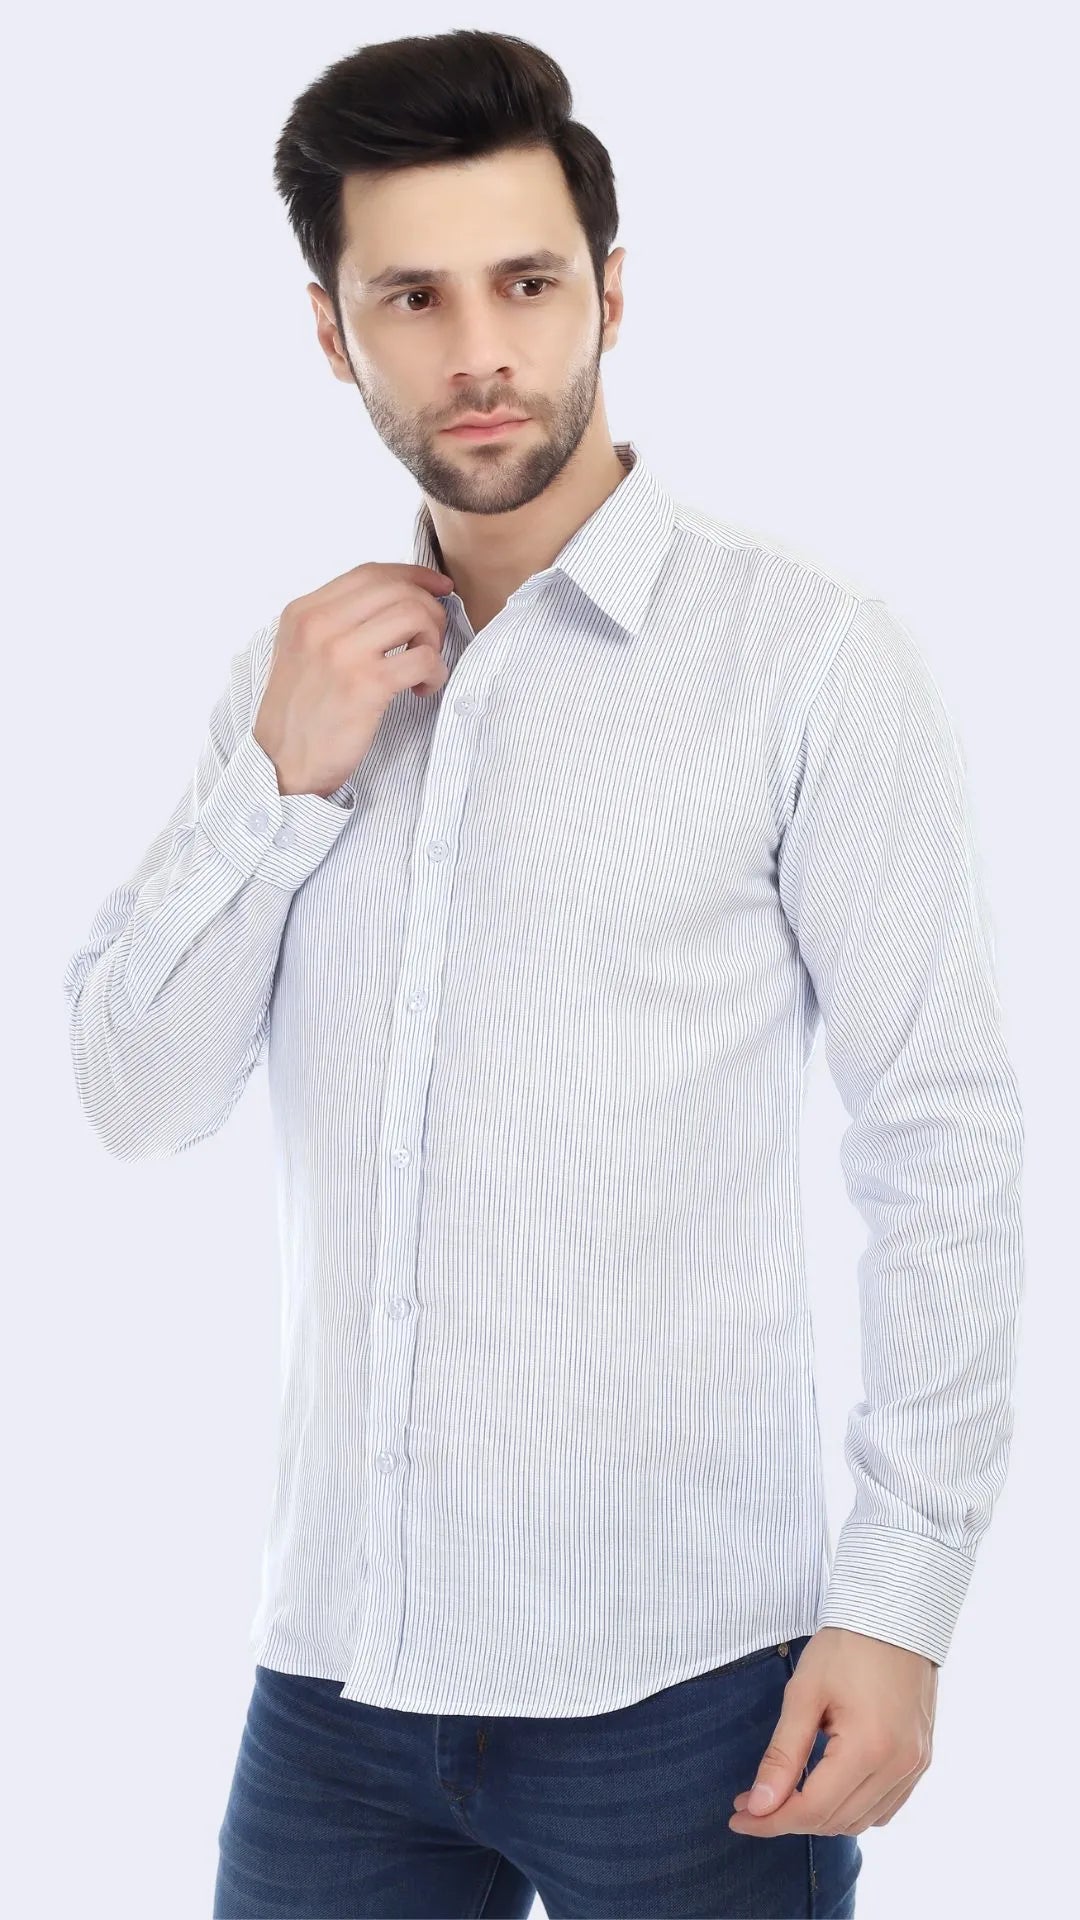 Stripes shirt for office by FD